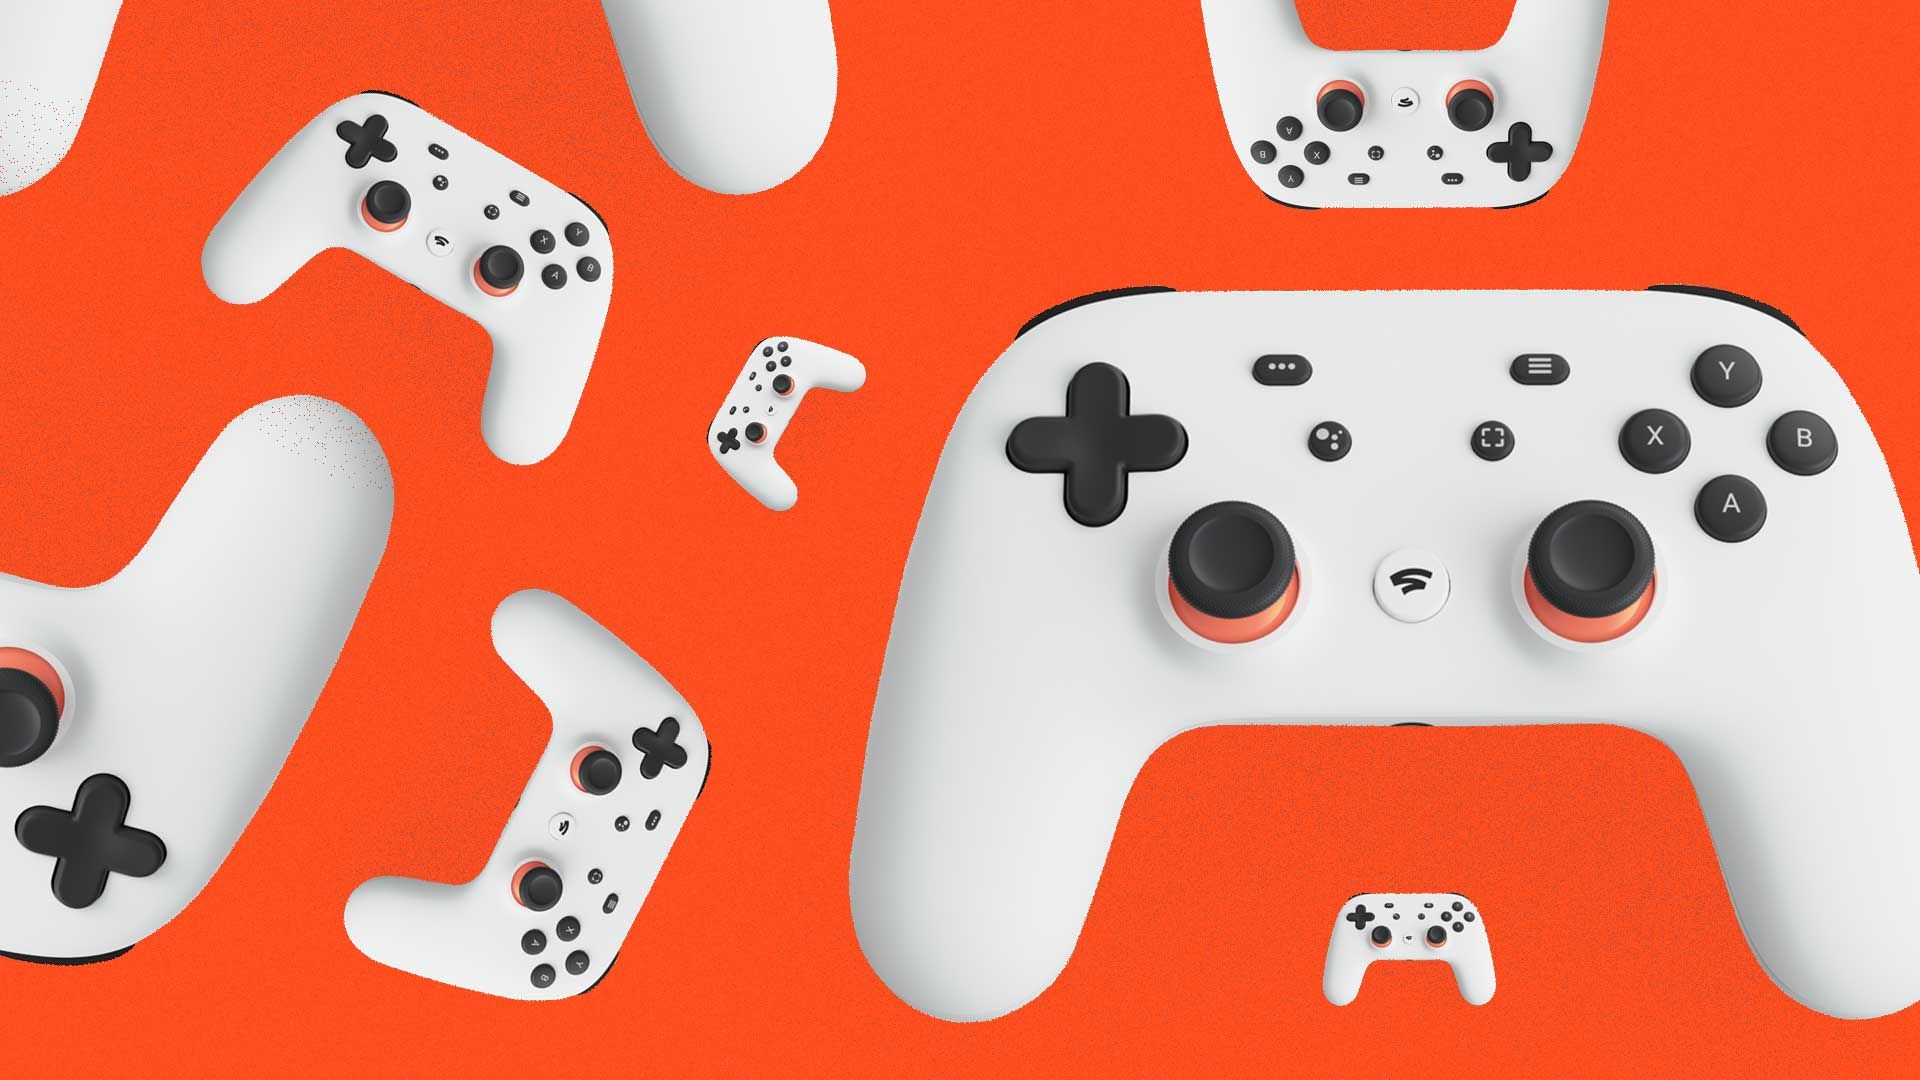 Multiple images of Google's game controller against an orange background